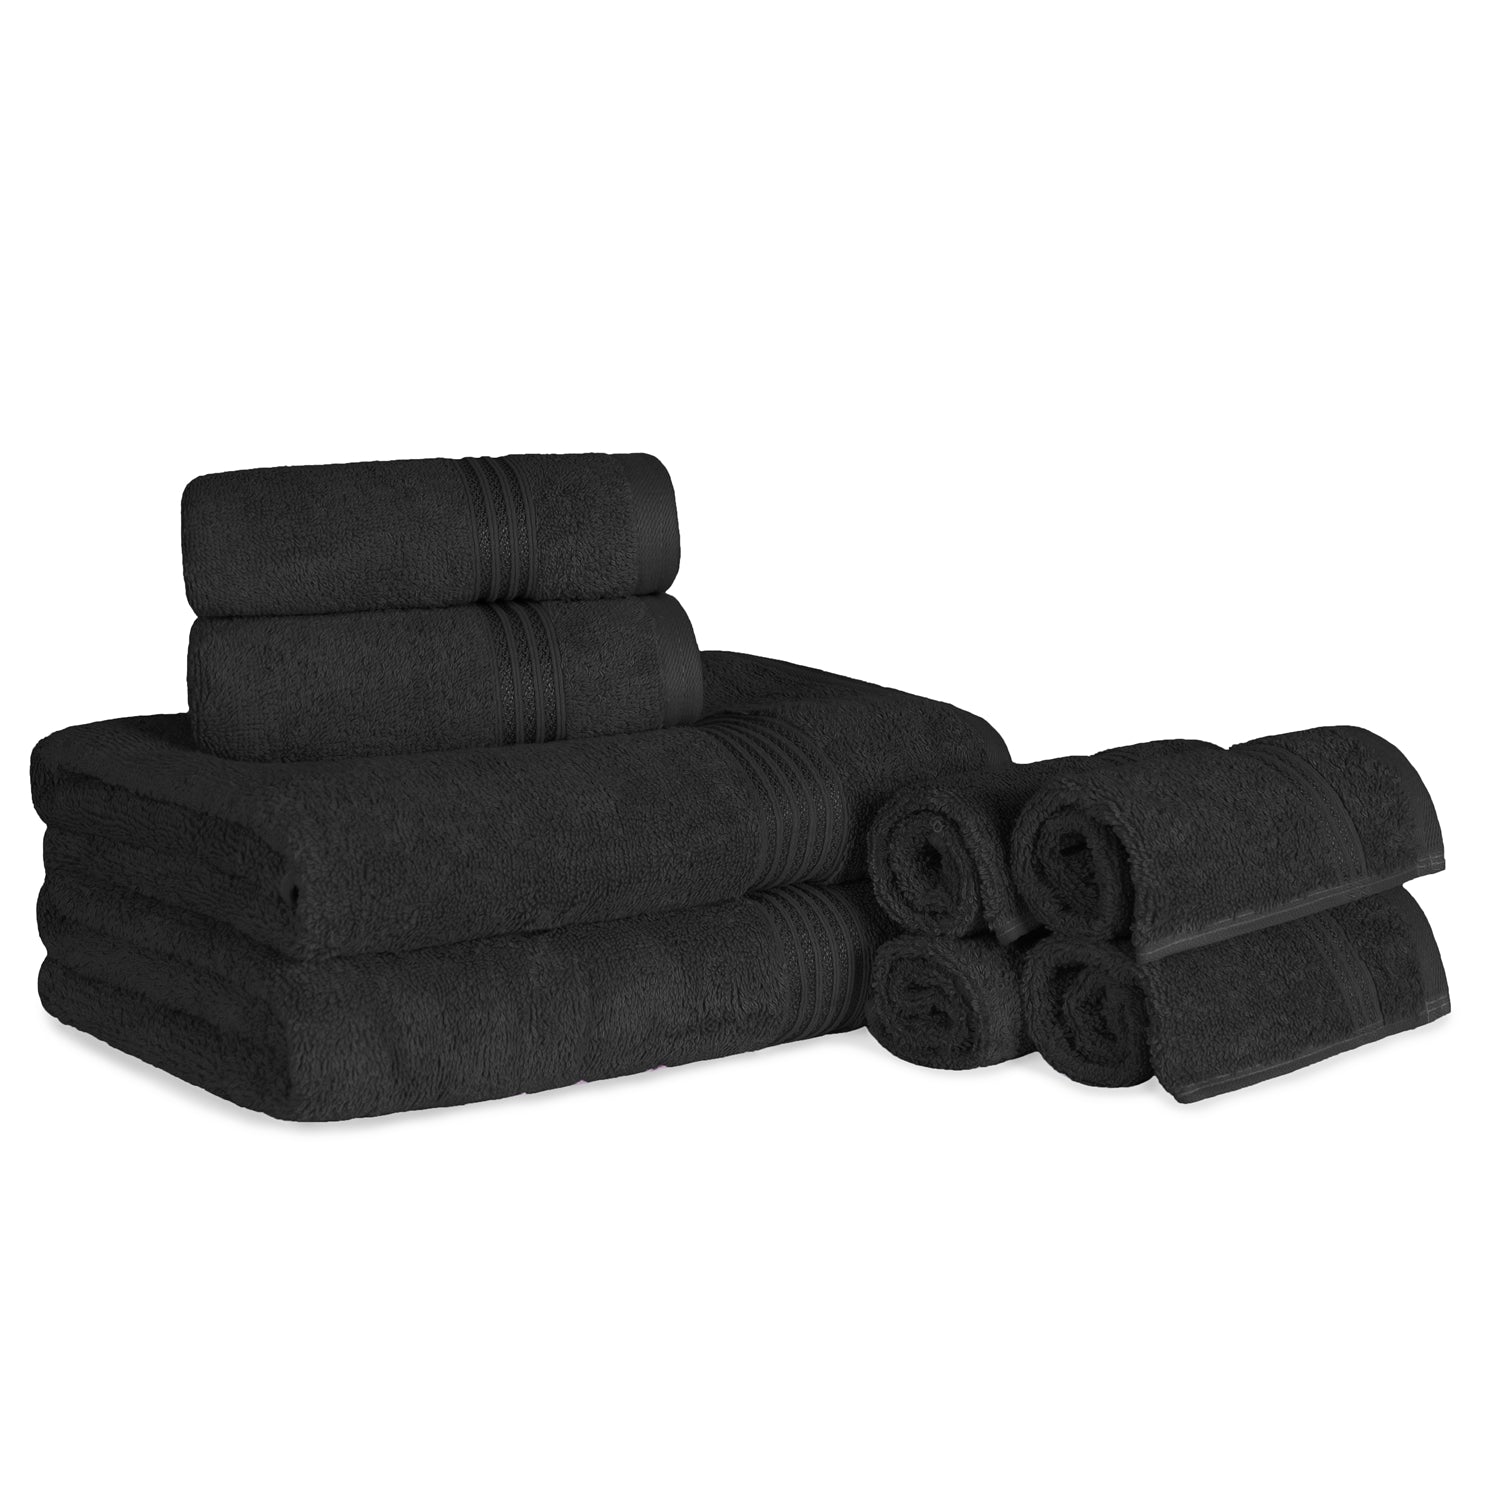 Egyptian Cotton Highly Absorbent Solid Ultra Soft Towel Set - Black